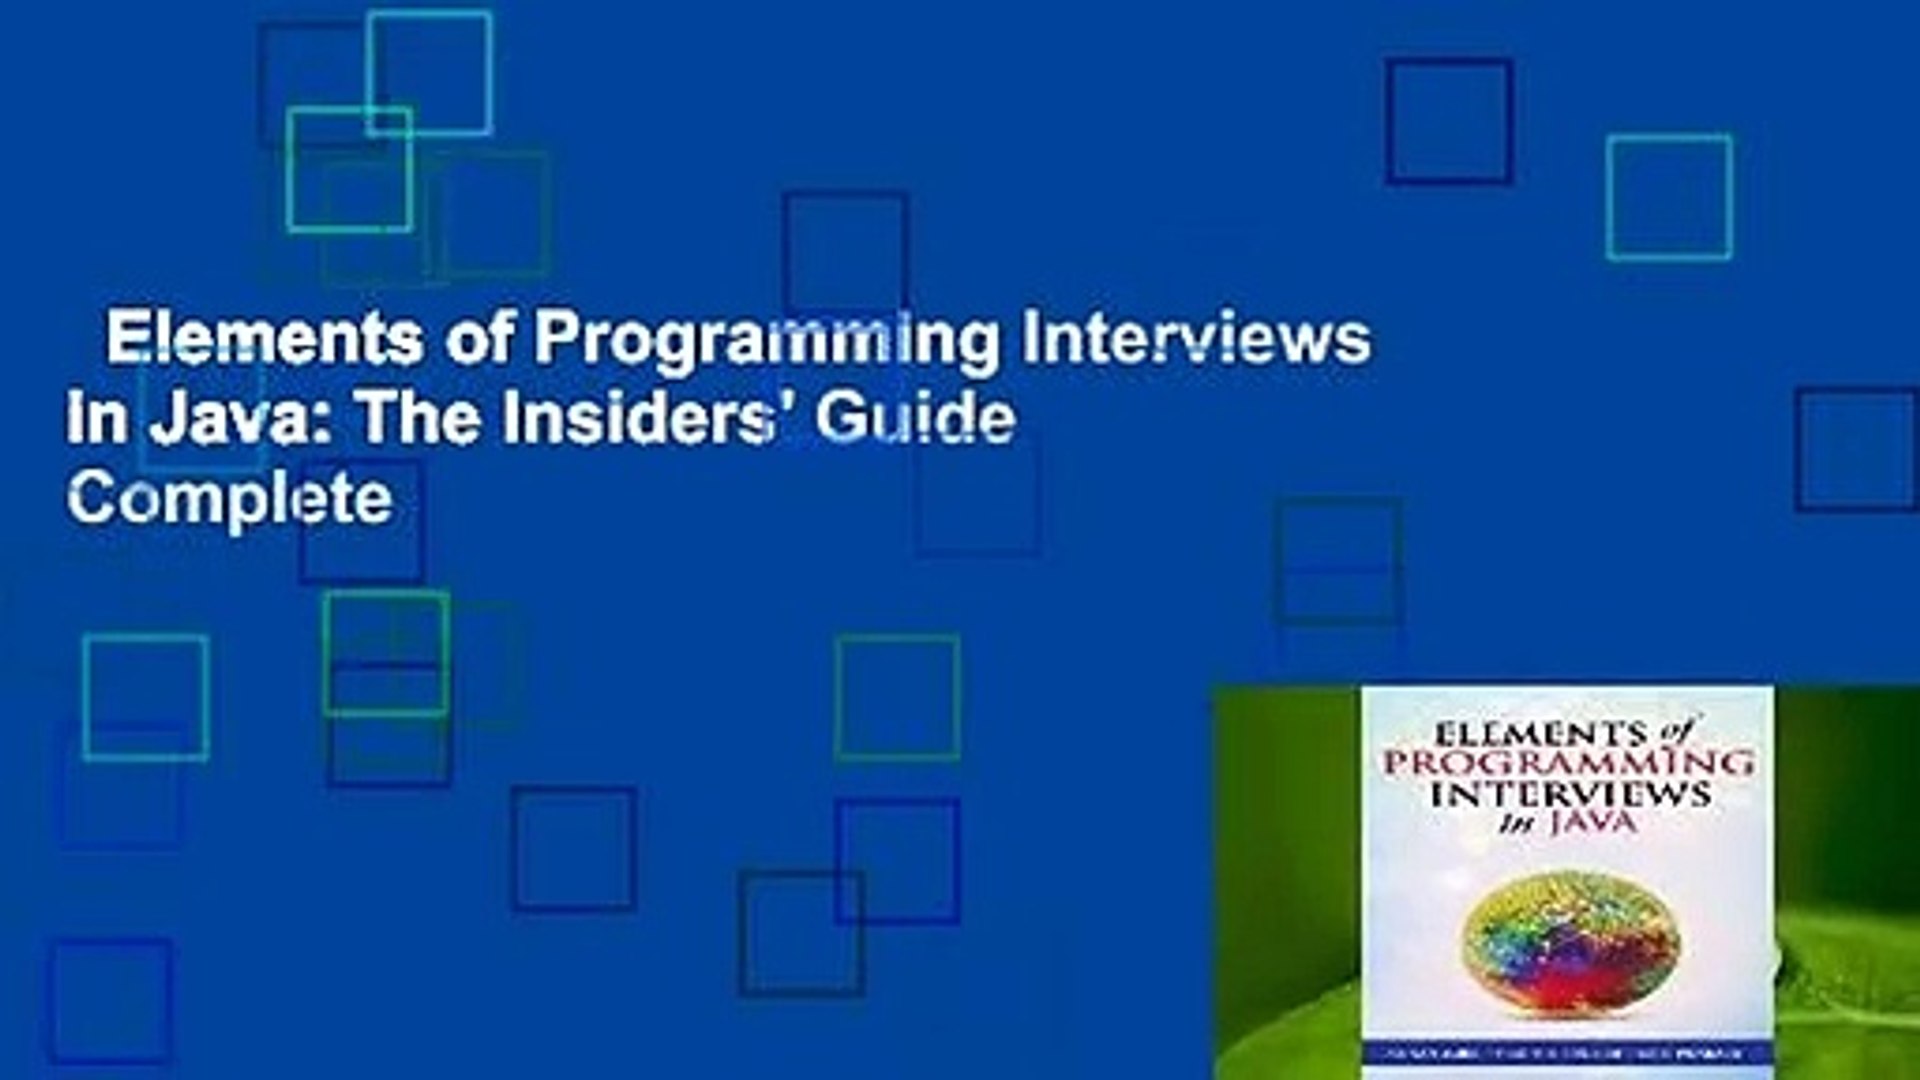 Elements of Programming Interviews in Java: The Insiders' Guide Complete